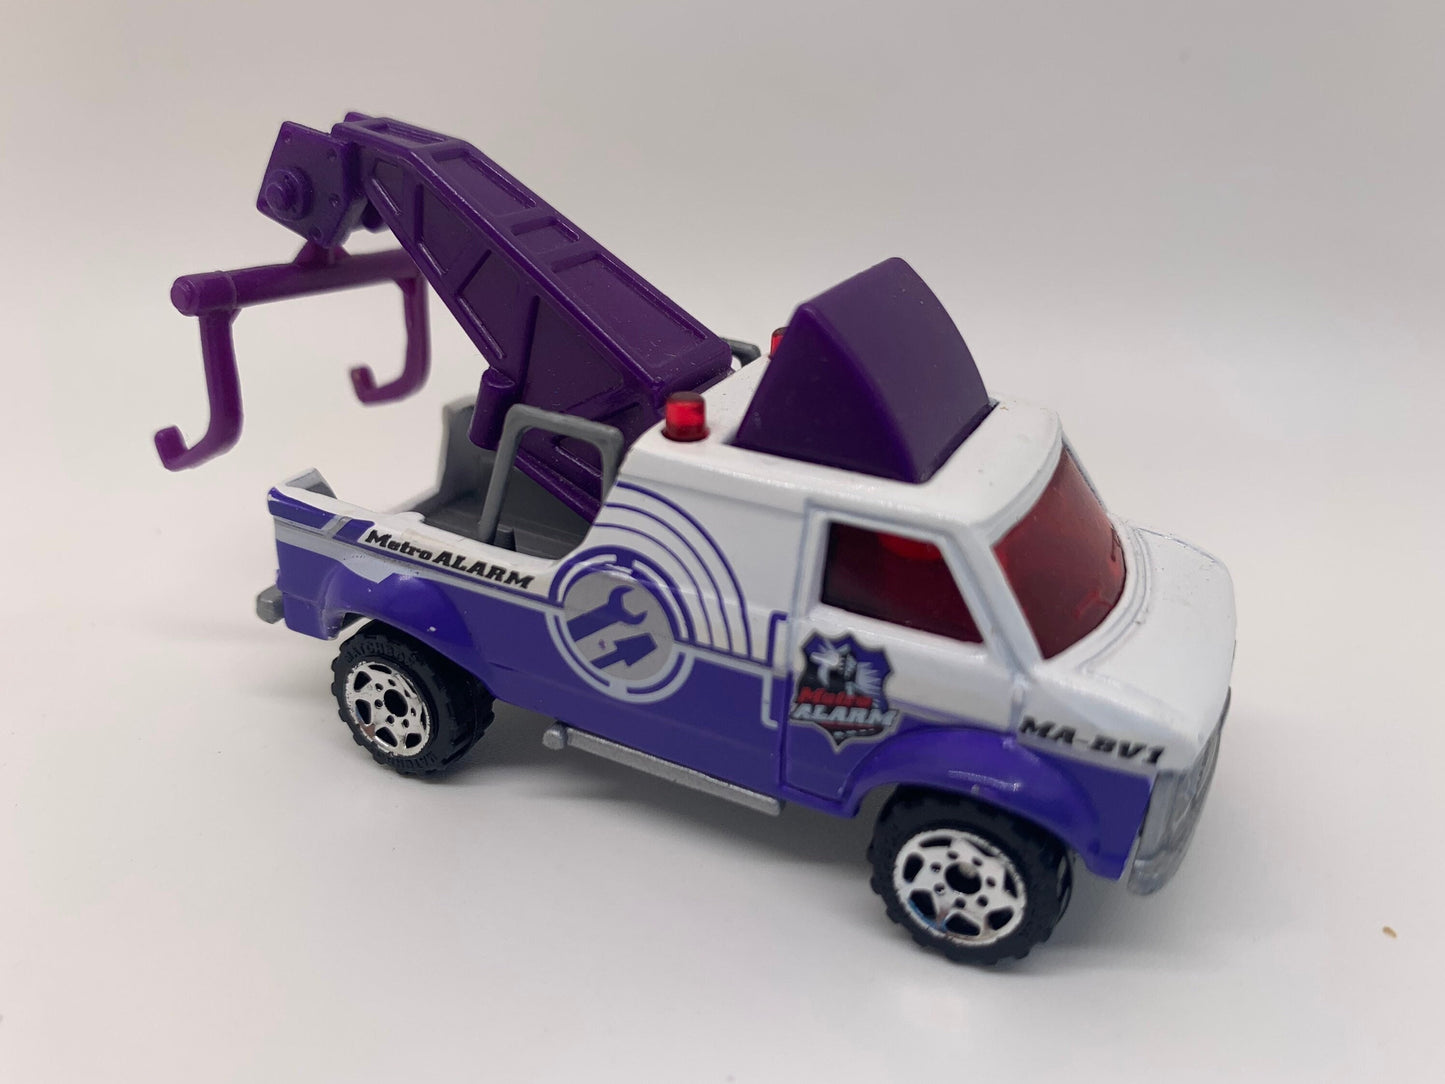 Matchbox Chevrolet Breakdown Van White and Purple Rescue Riders Perfect Birthday Gift Miniature Collectable Model Toy Car